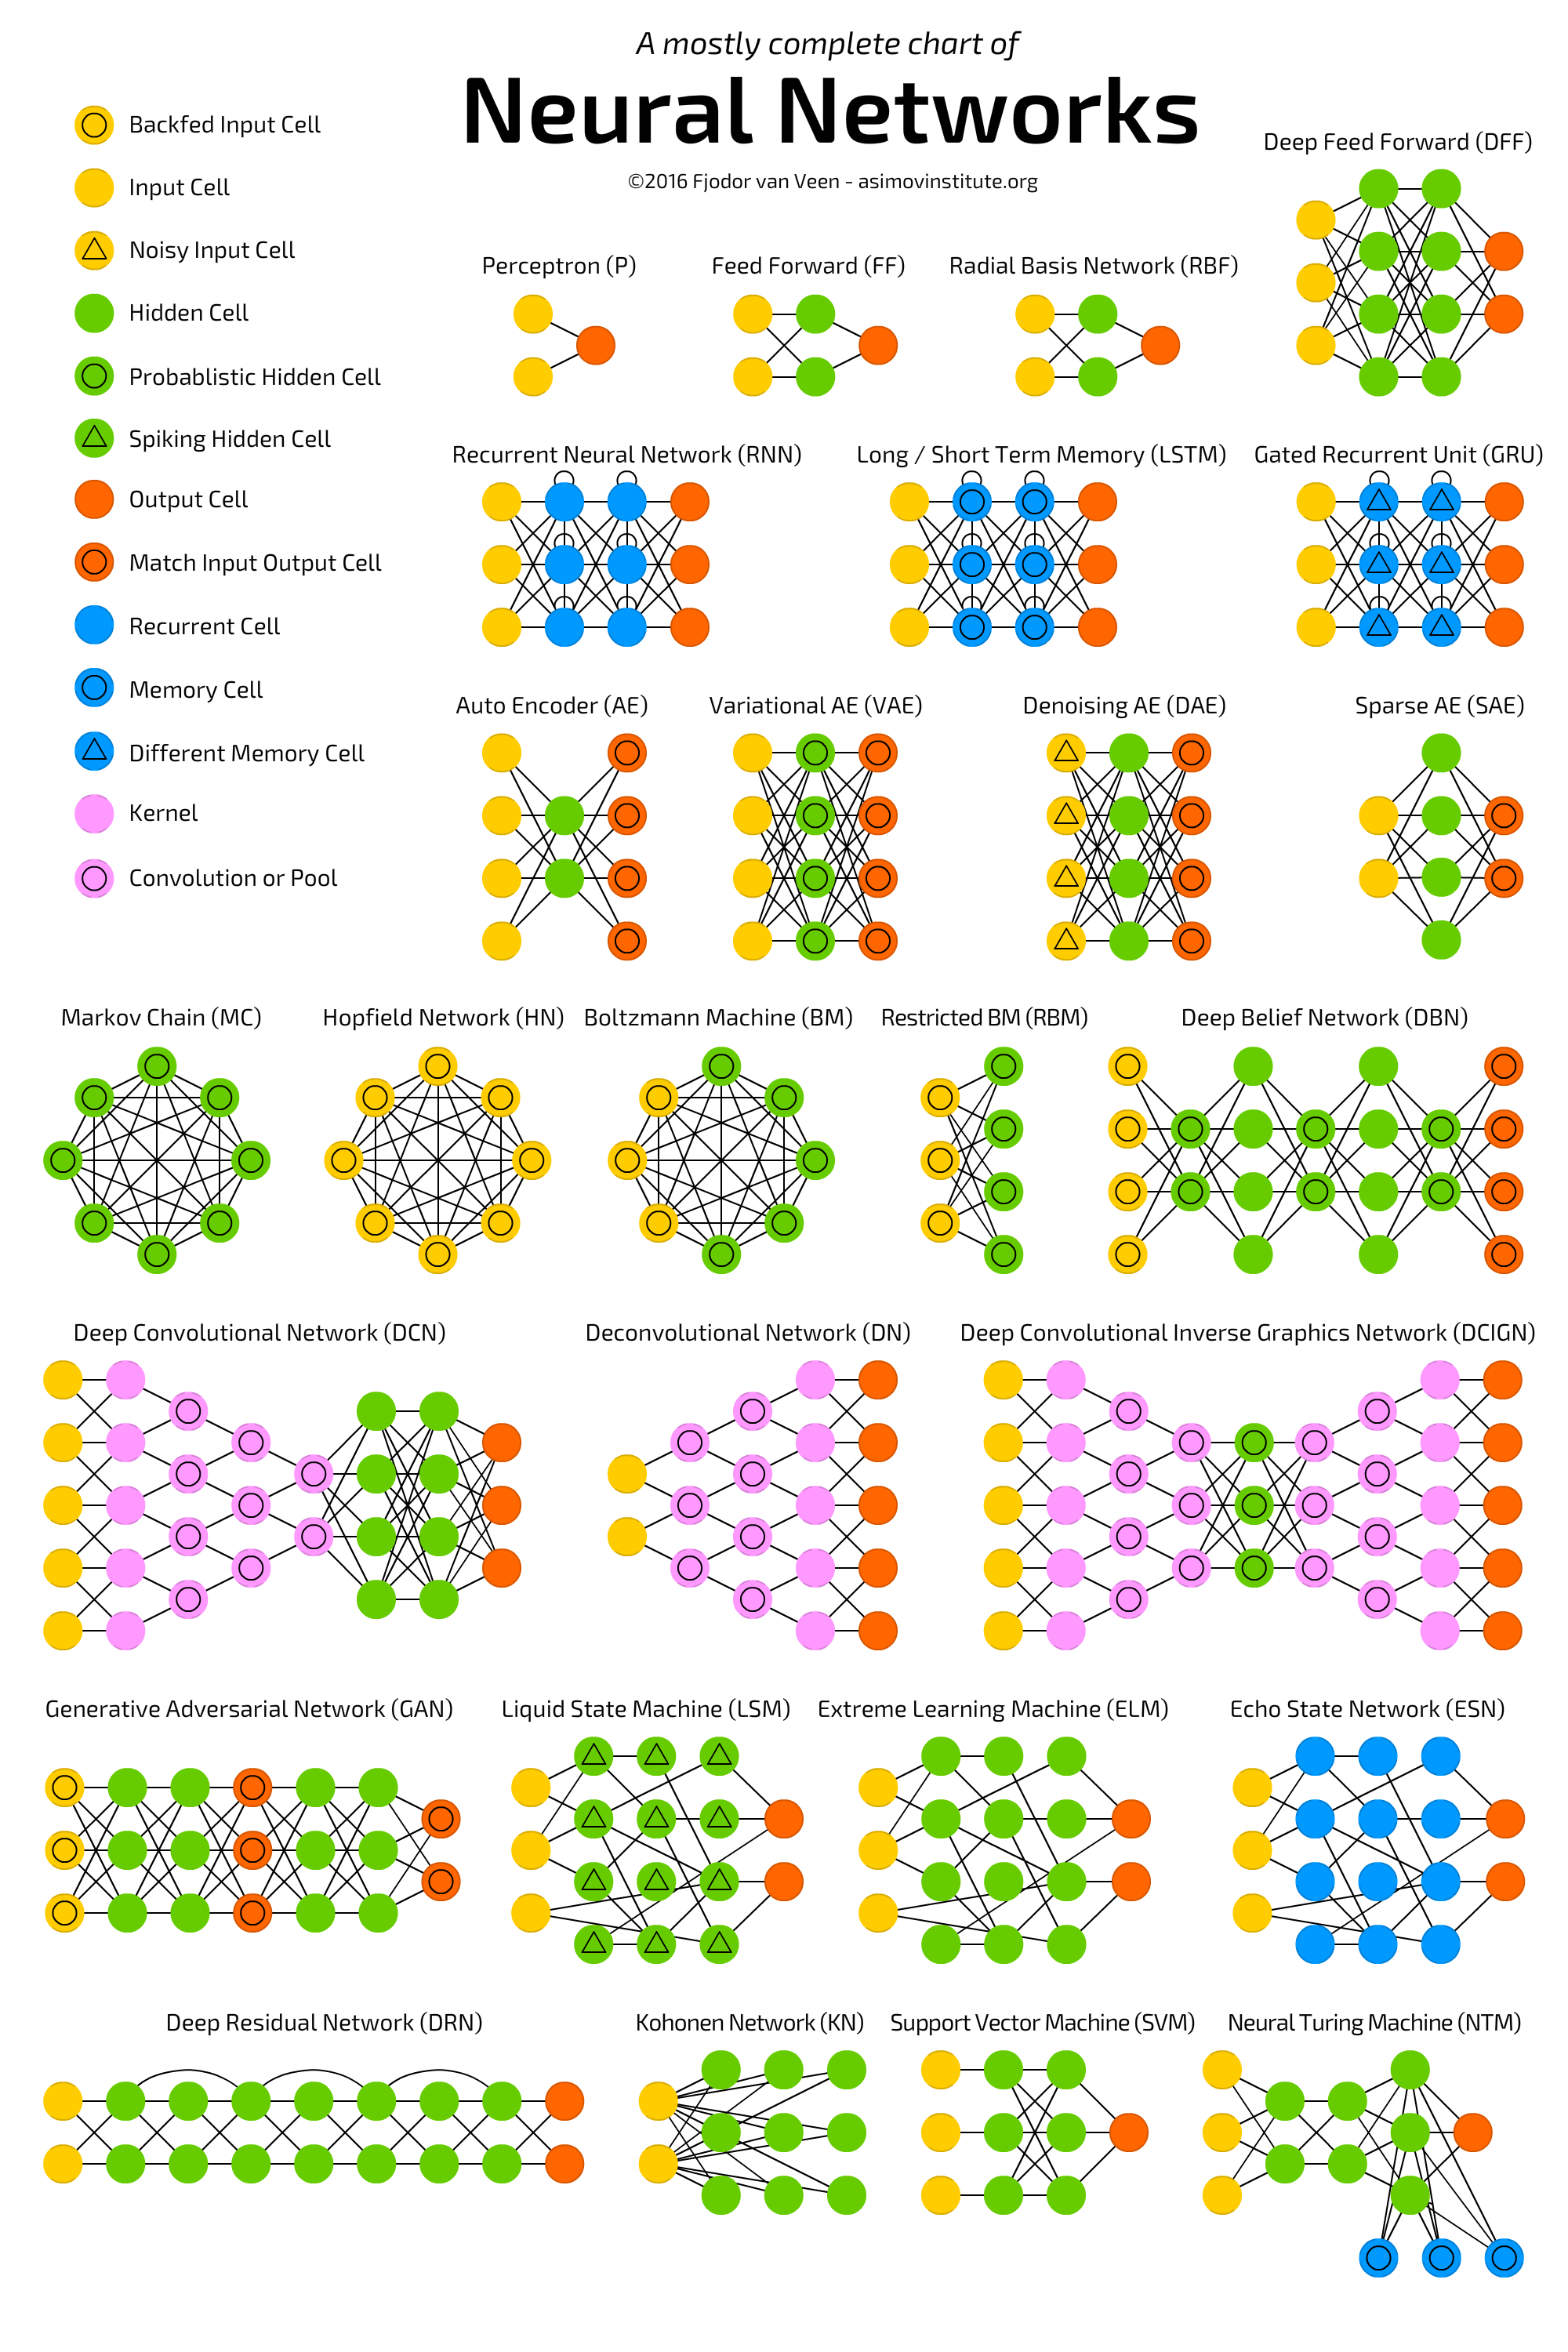 Overview of the most popular neural networks